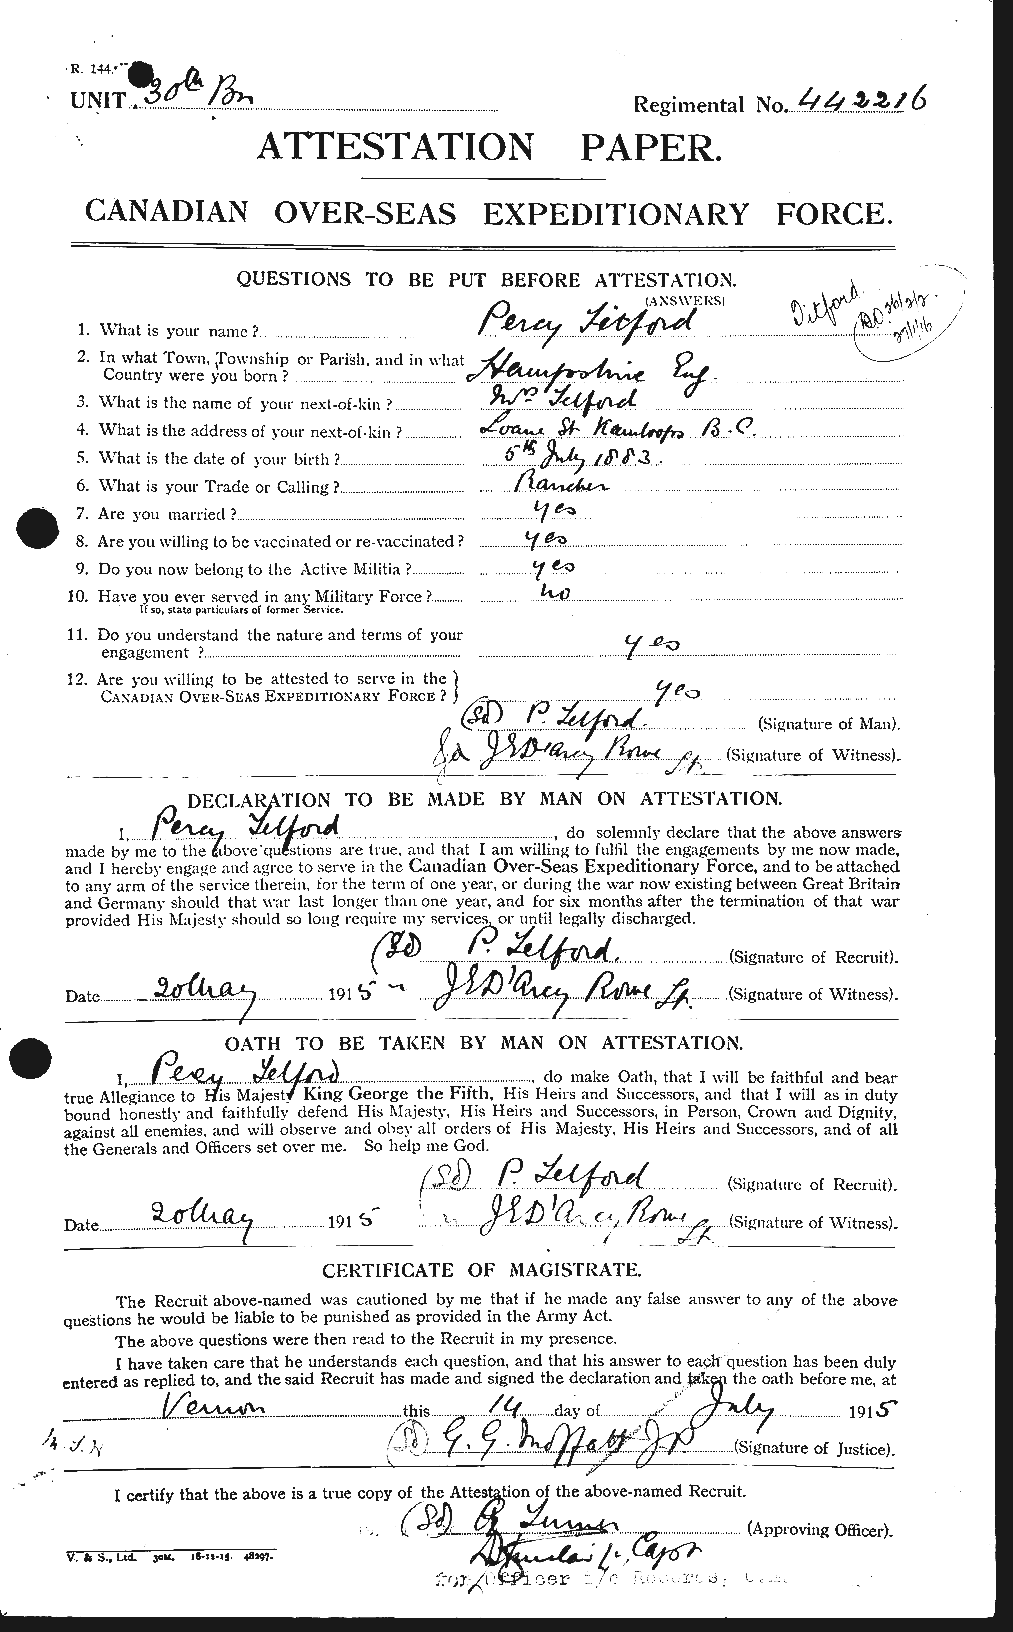 Personnel Records of the First World War - CEF 634890a